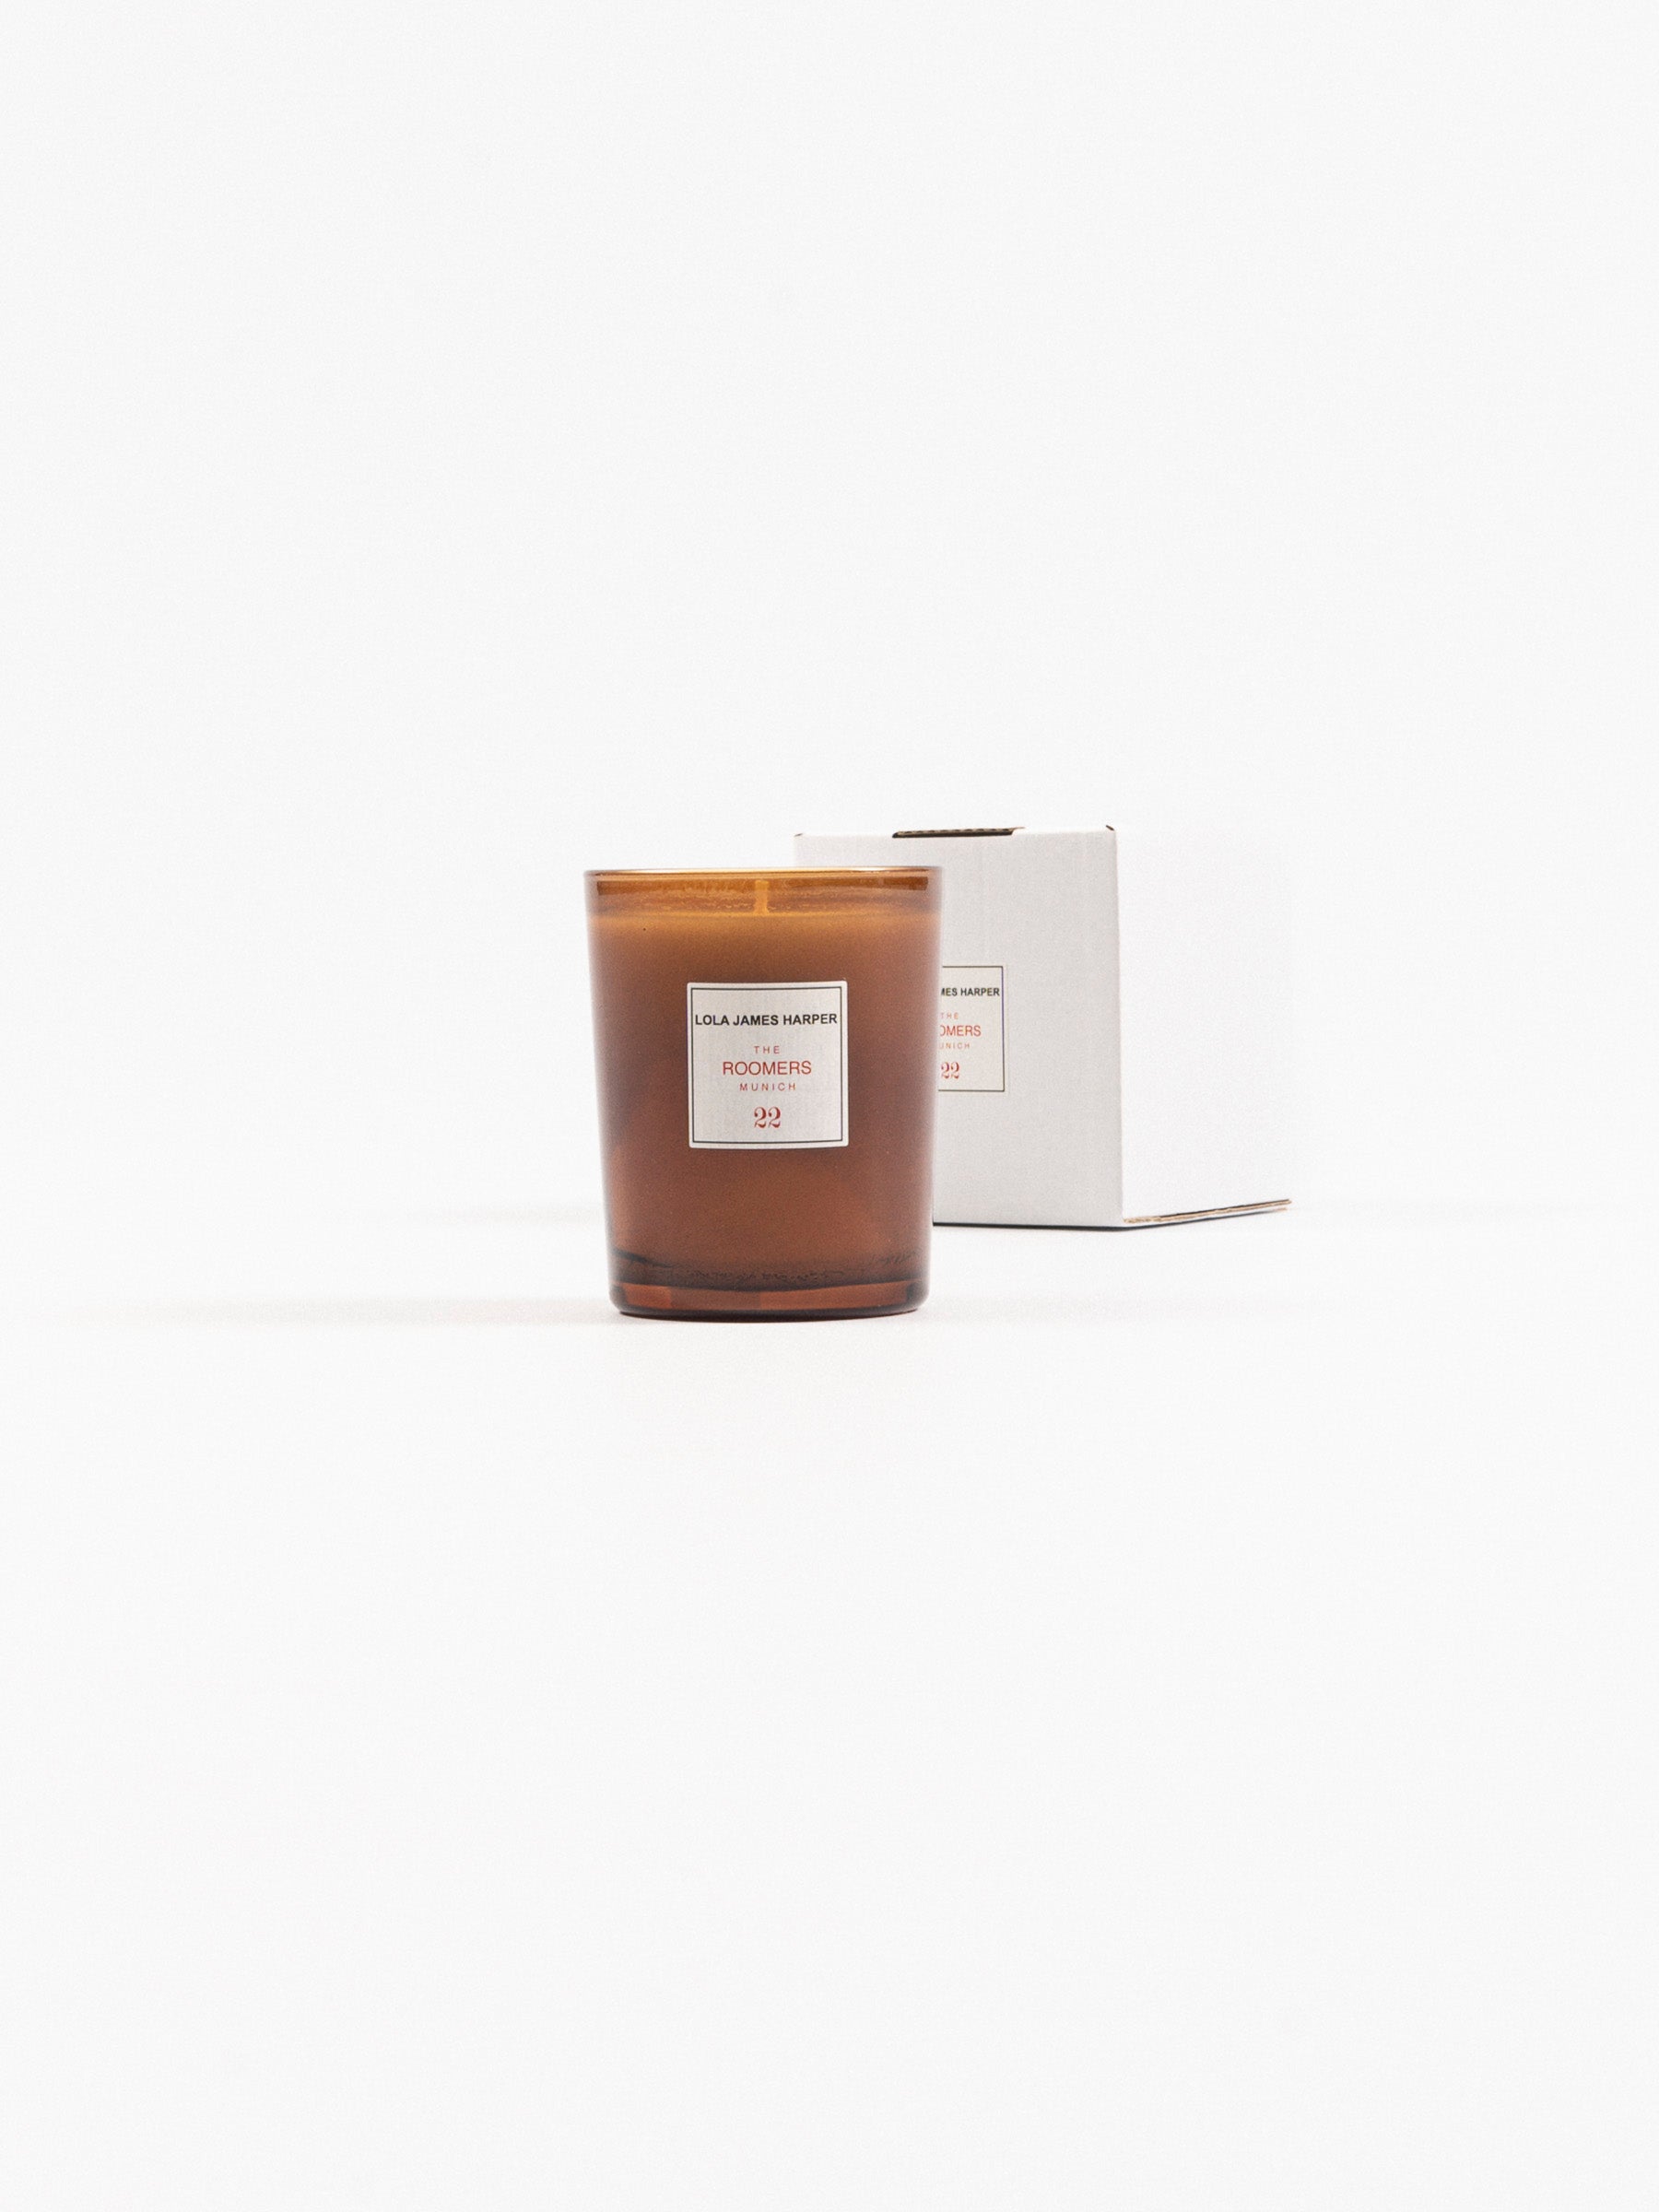 Roomers Munich Scent Candle